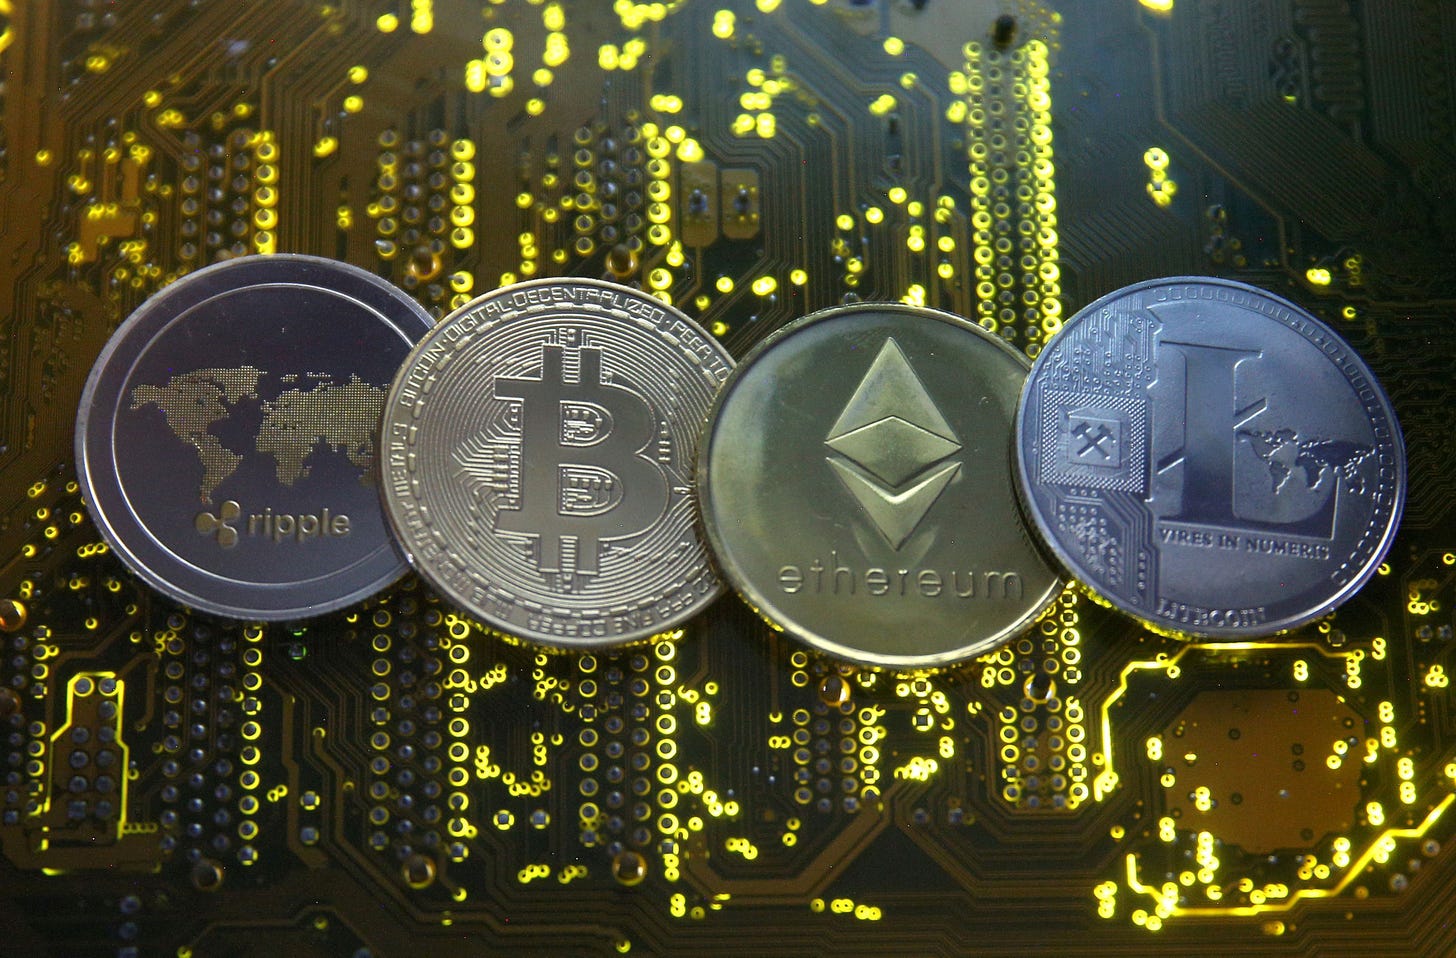 Crypto market cap surges to record $2 trln, bitcoin at $1.1 trln | Reuters